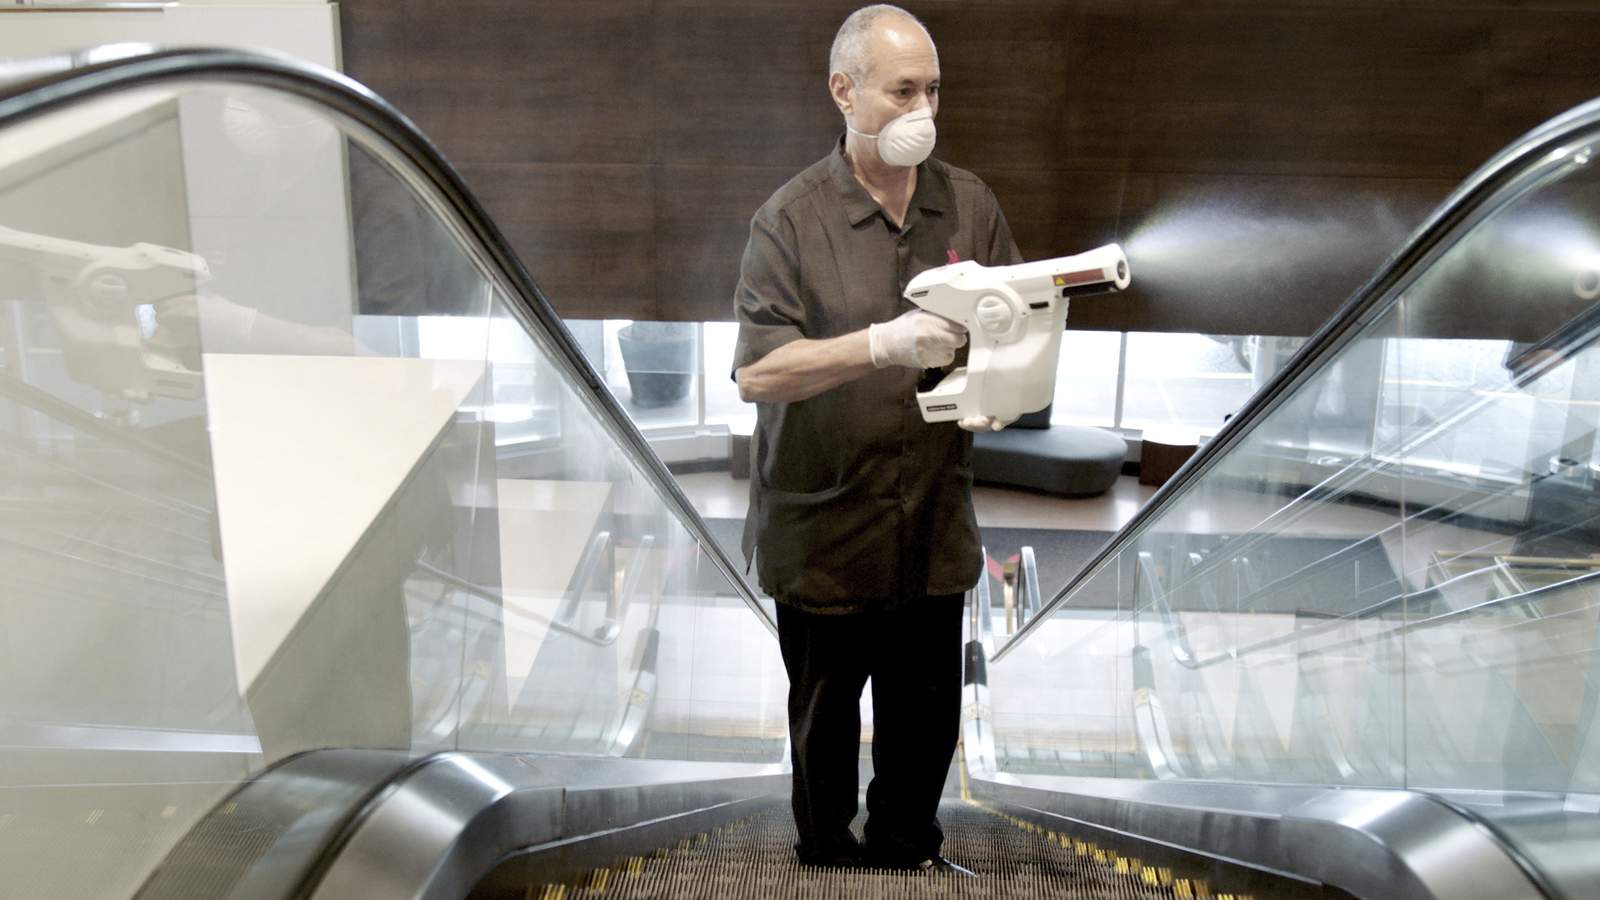 As business trickles back, hotels compete on cleanliness